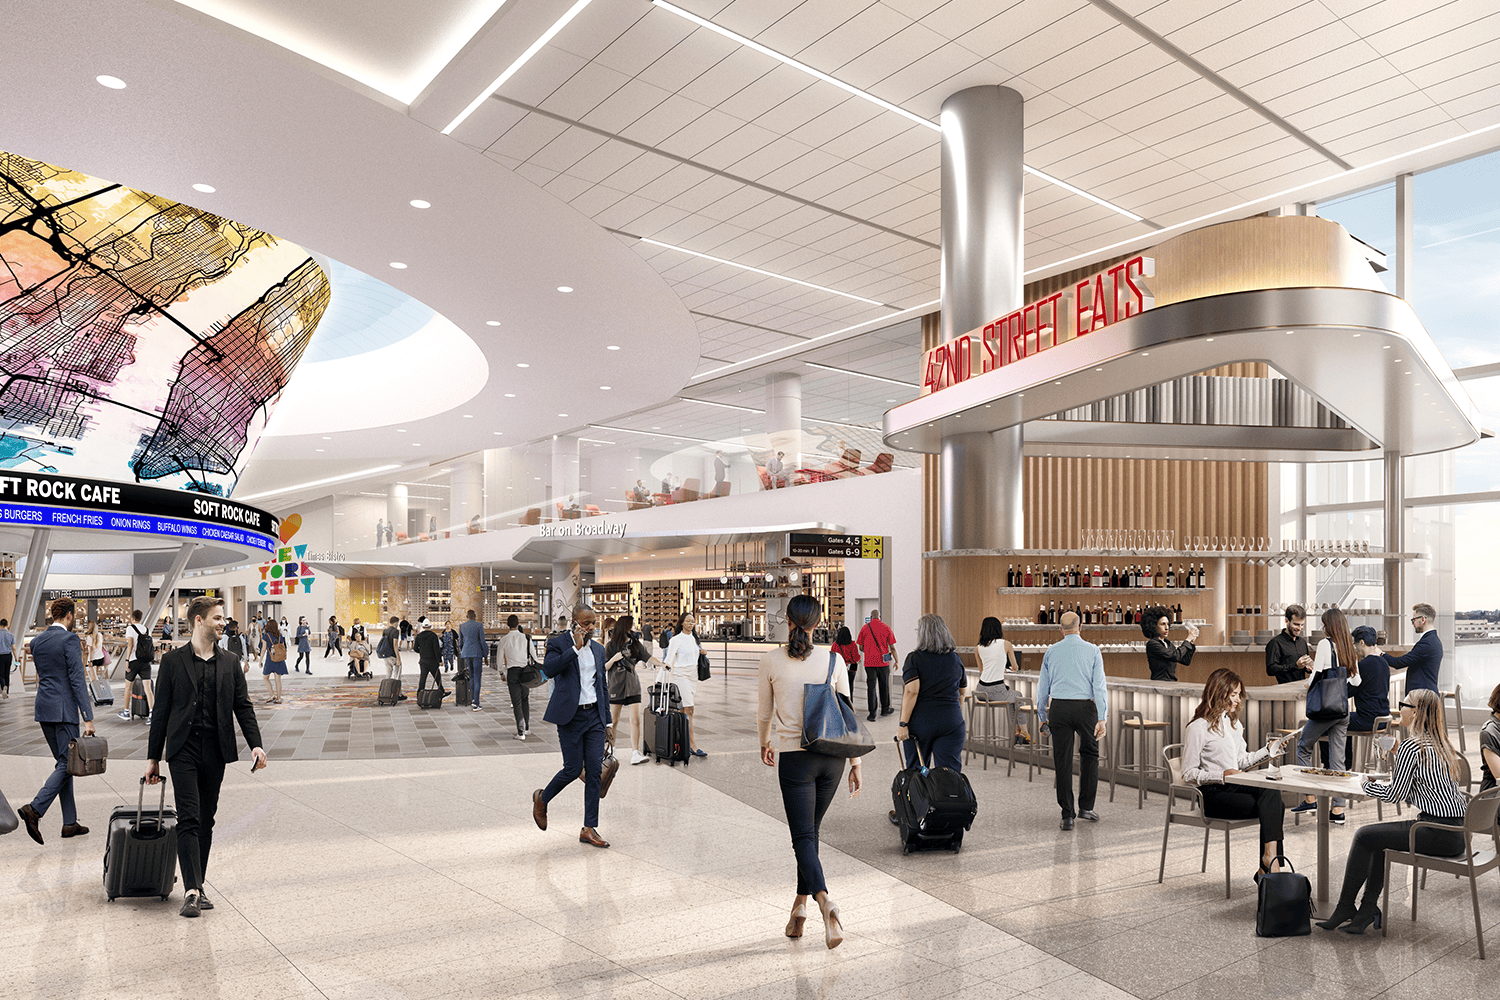 Rendering of the Terminal 6 Arrivals Hall